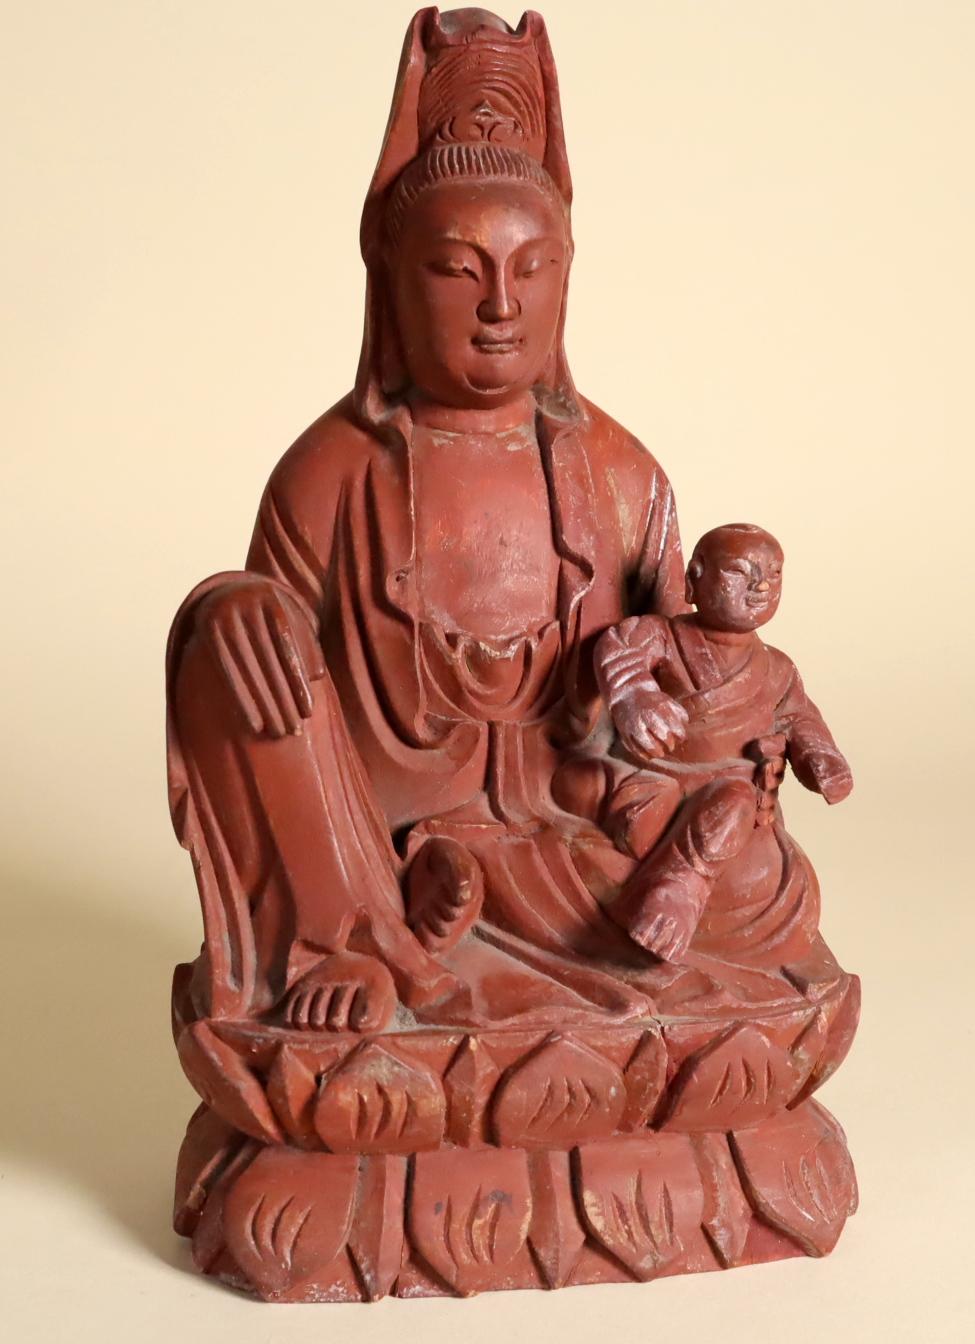 A Chinese wood figure of Songzi Guanyin (Guan Yin, or Quan Yin, or Songzi Niangniang). Shown seated in lalitasana (pose of ease) with an animated boy seated on her left leg. Her hair is dressed in a high topknot centered by a lotus bud and covered